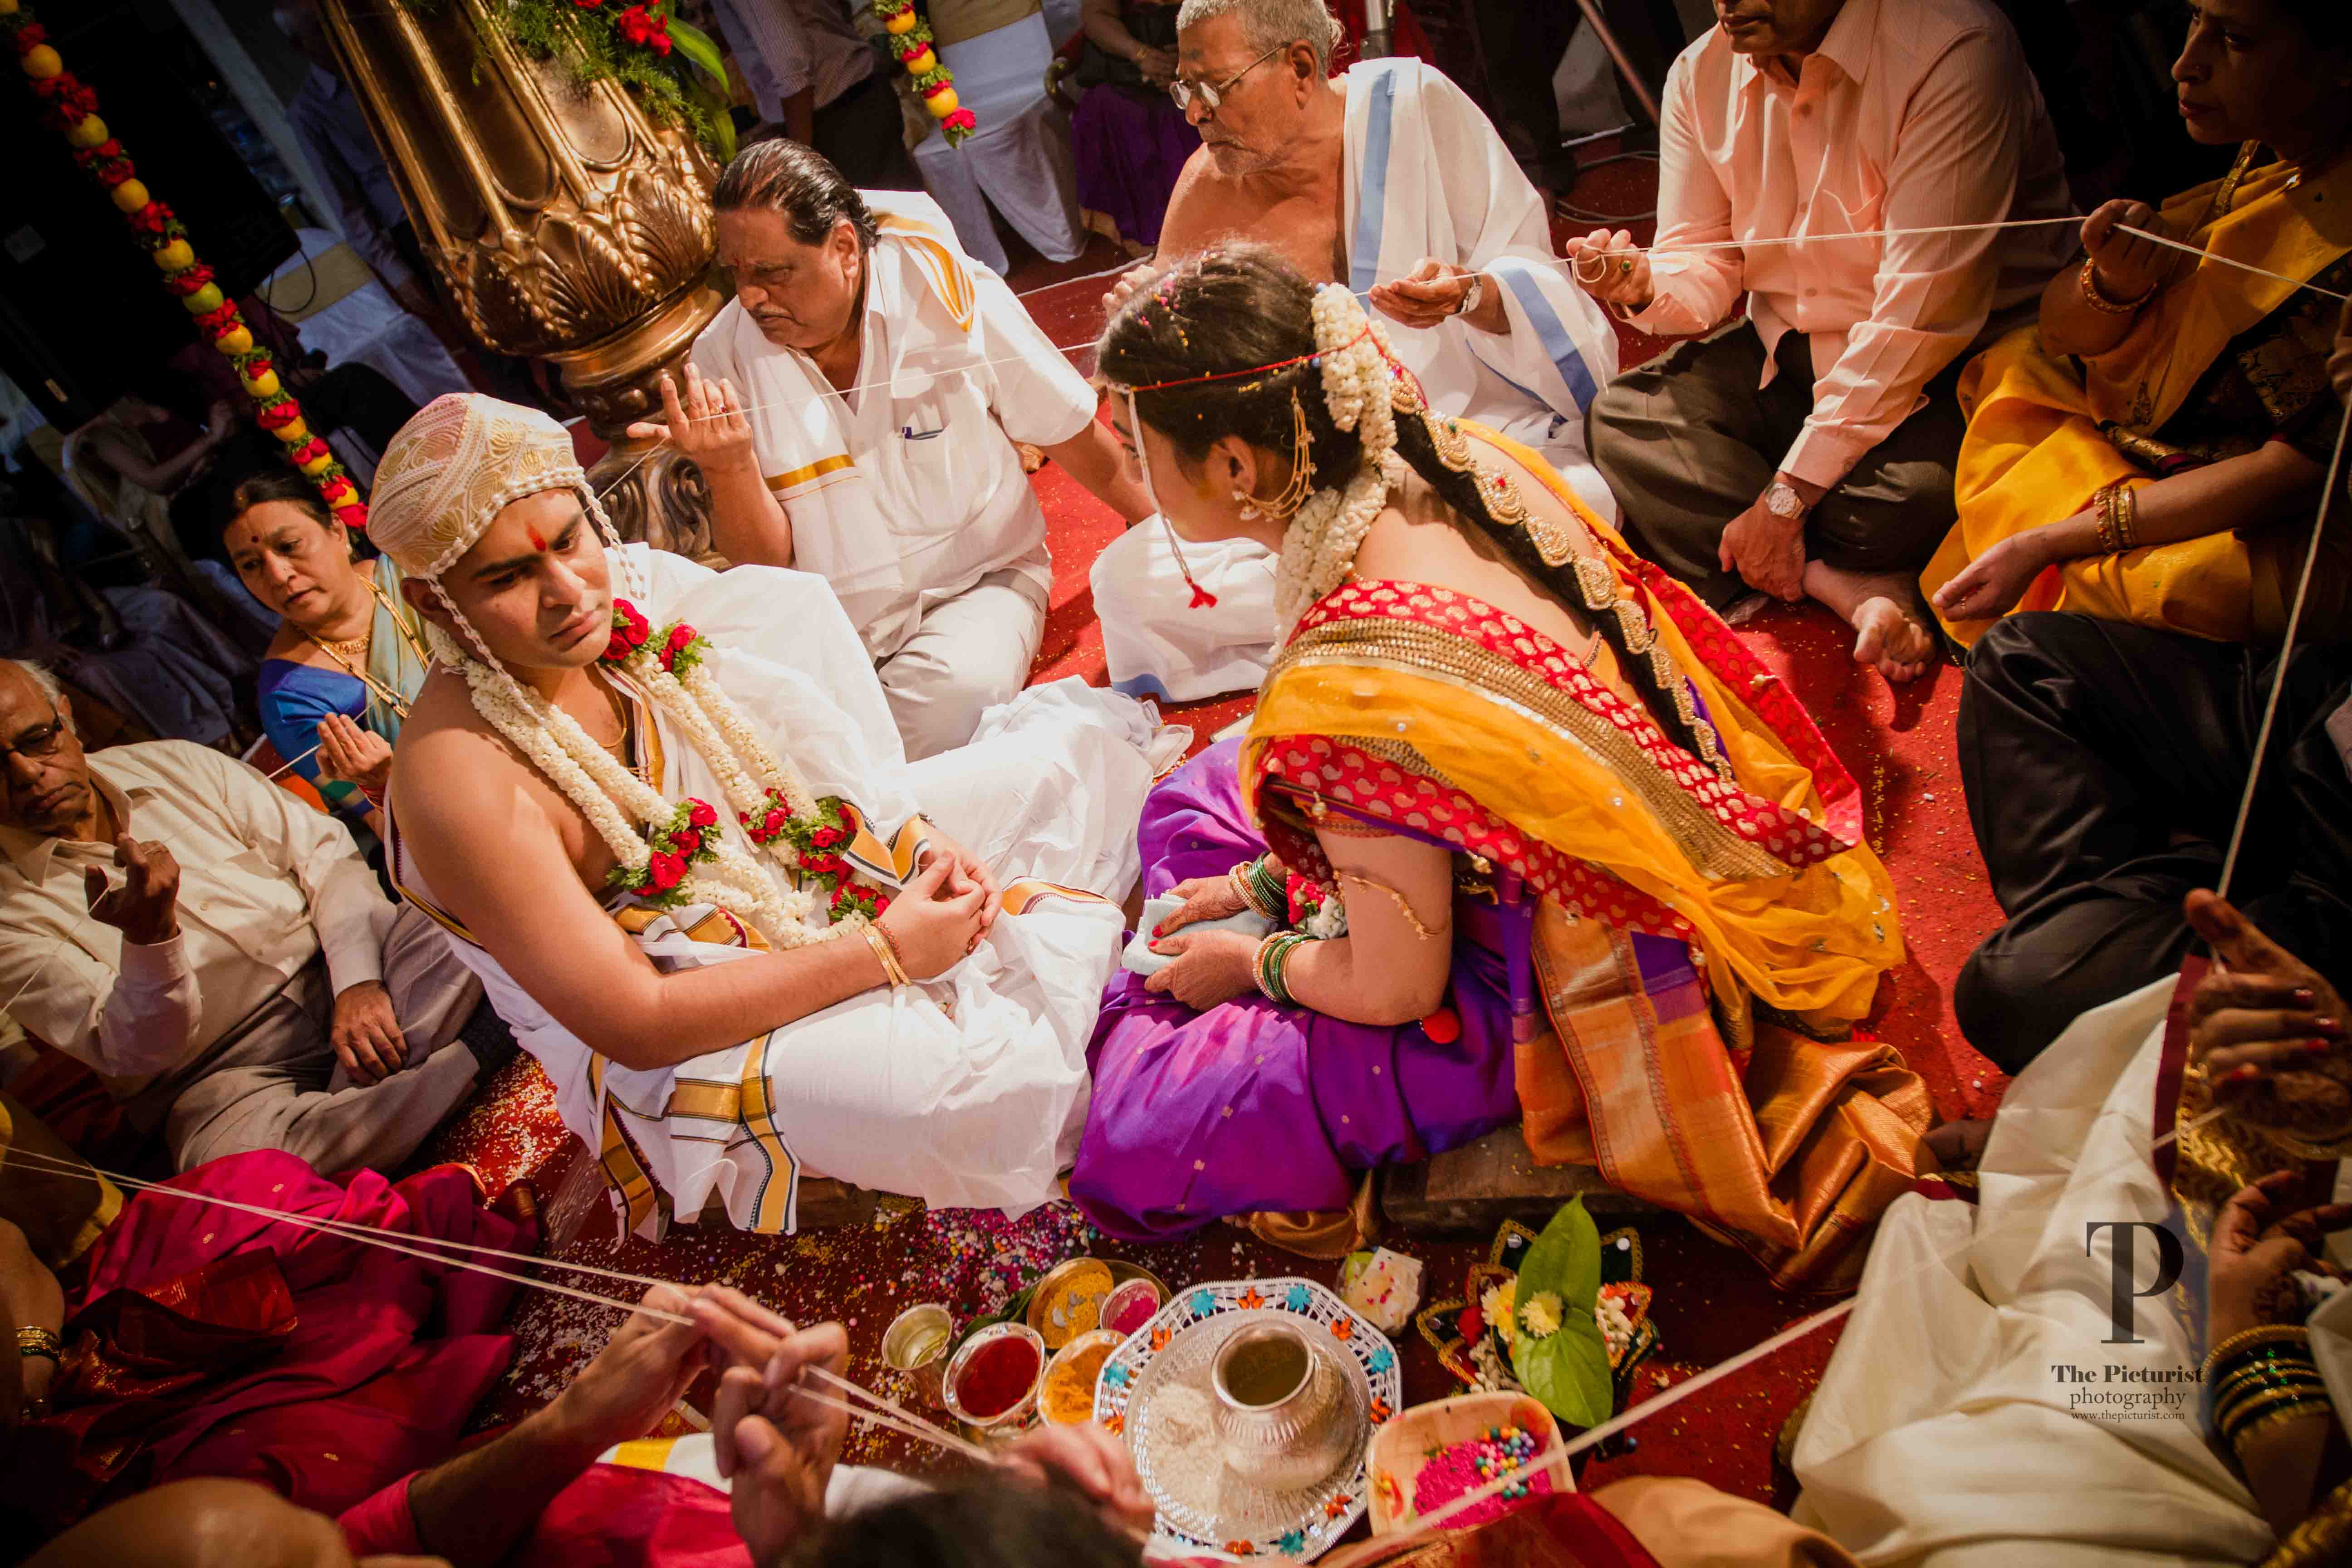 sacred thread is taken around the couple as though to create a protective boundary around them.